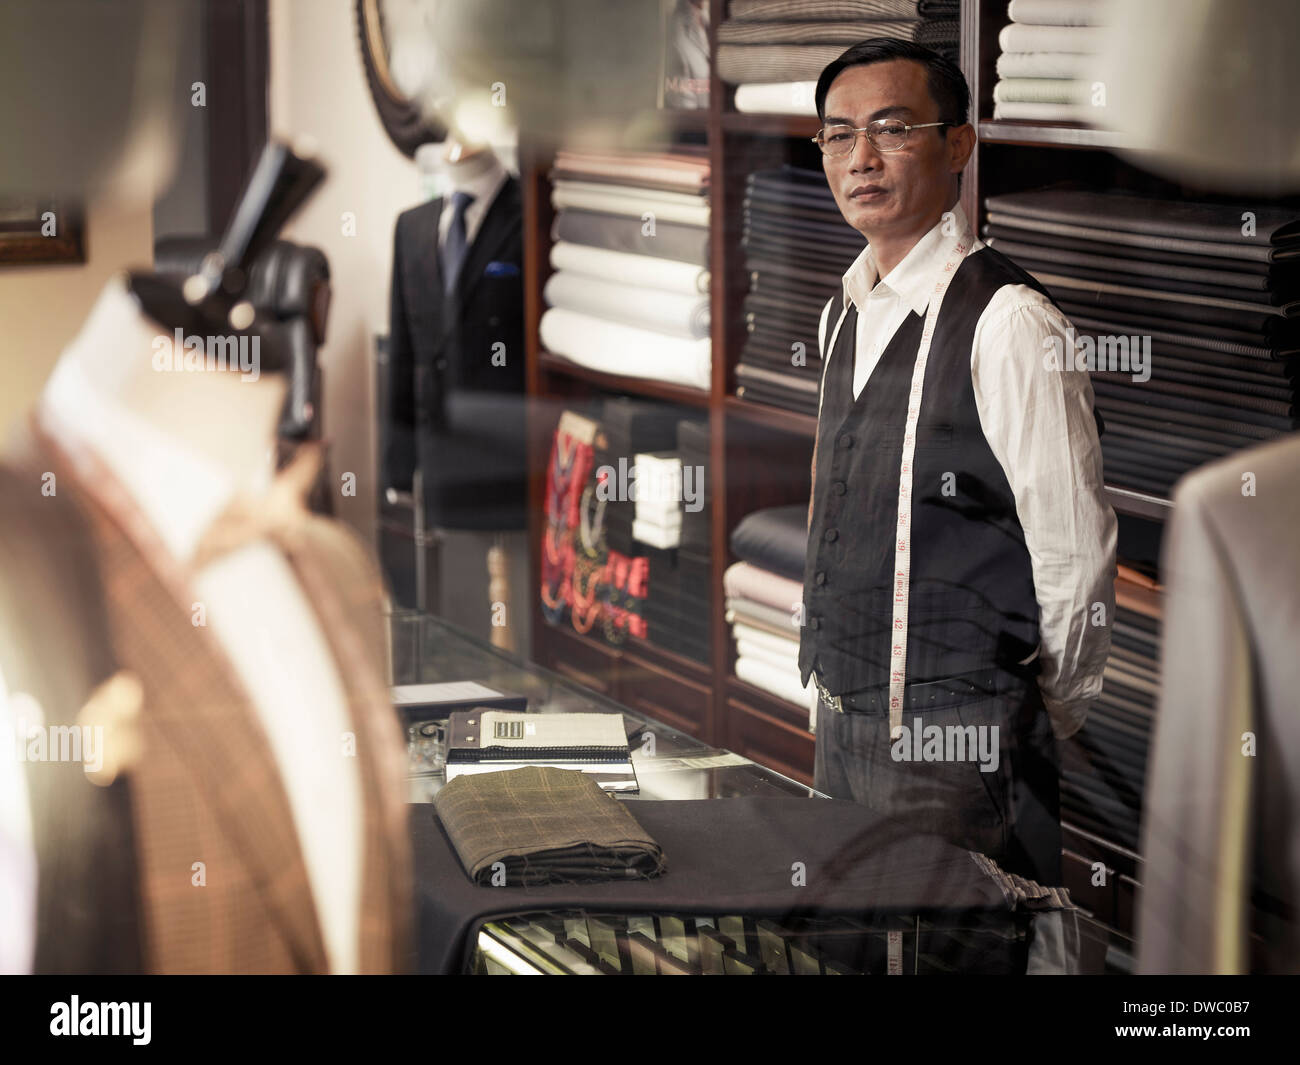 Tailor standing behind counter in tailors shop Stock Photo